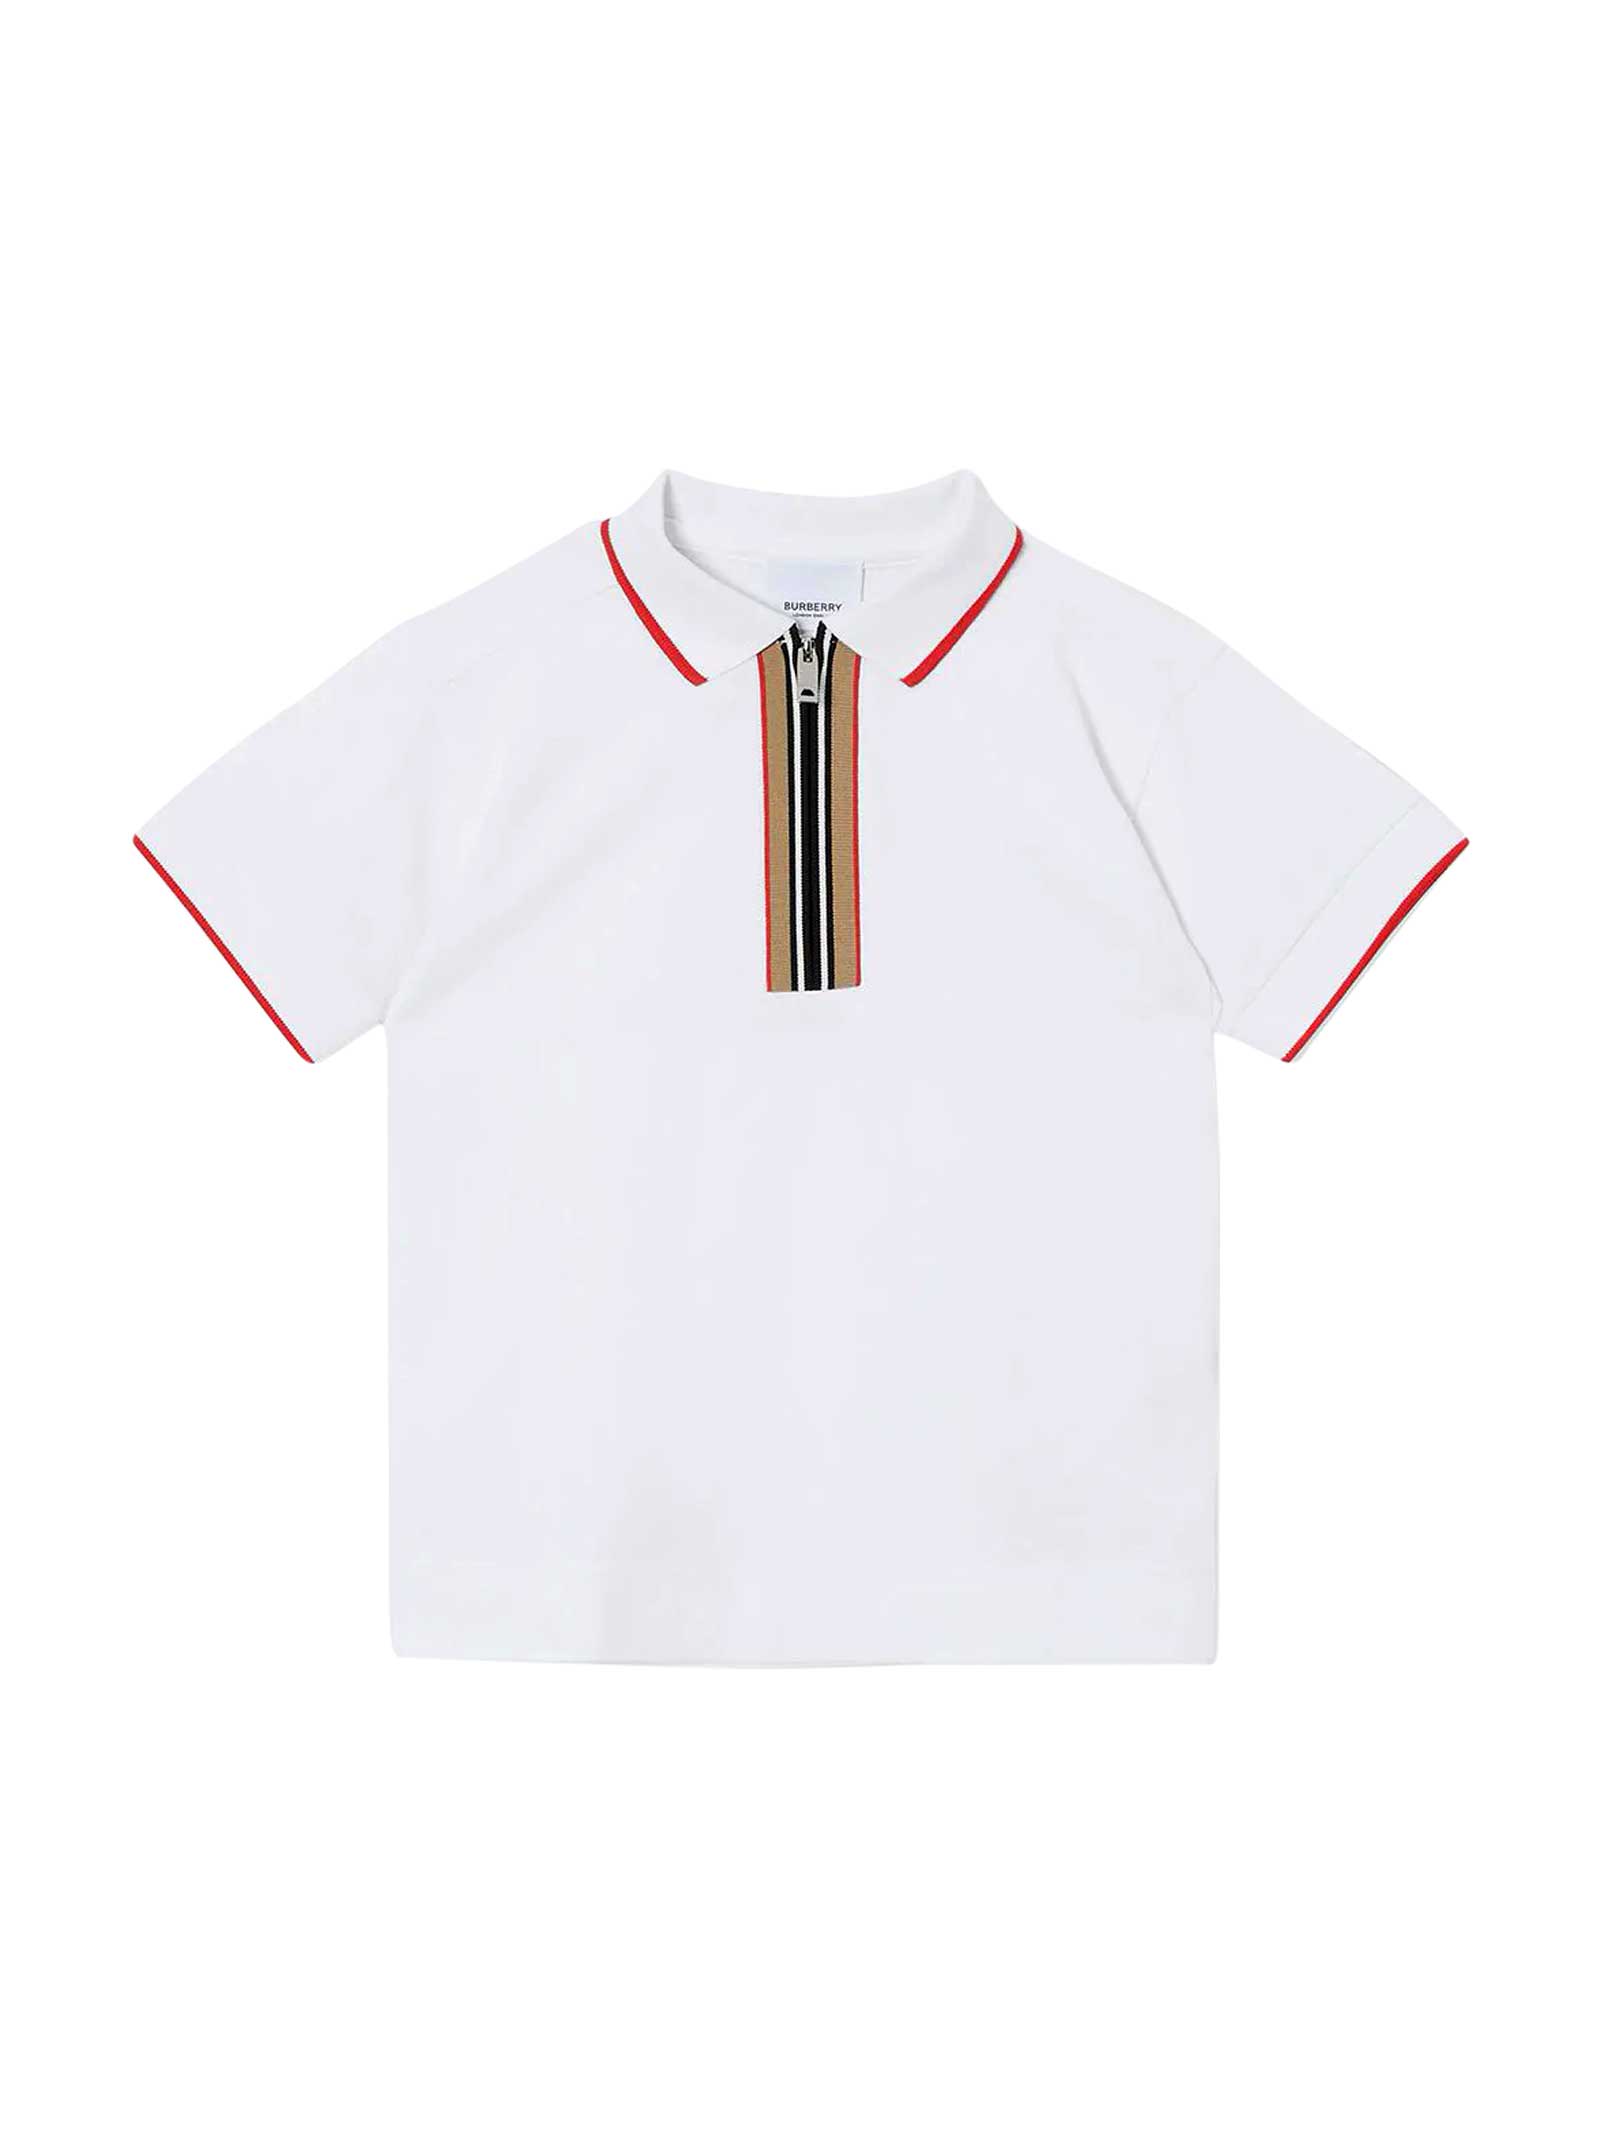 BURBERRY POLO SHIRT WITH STRIPED DETAIL,8036412 A1464